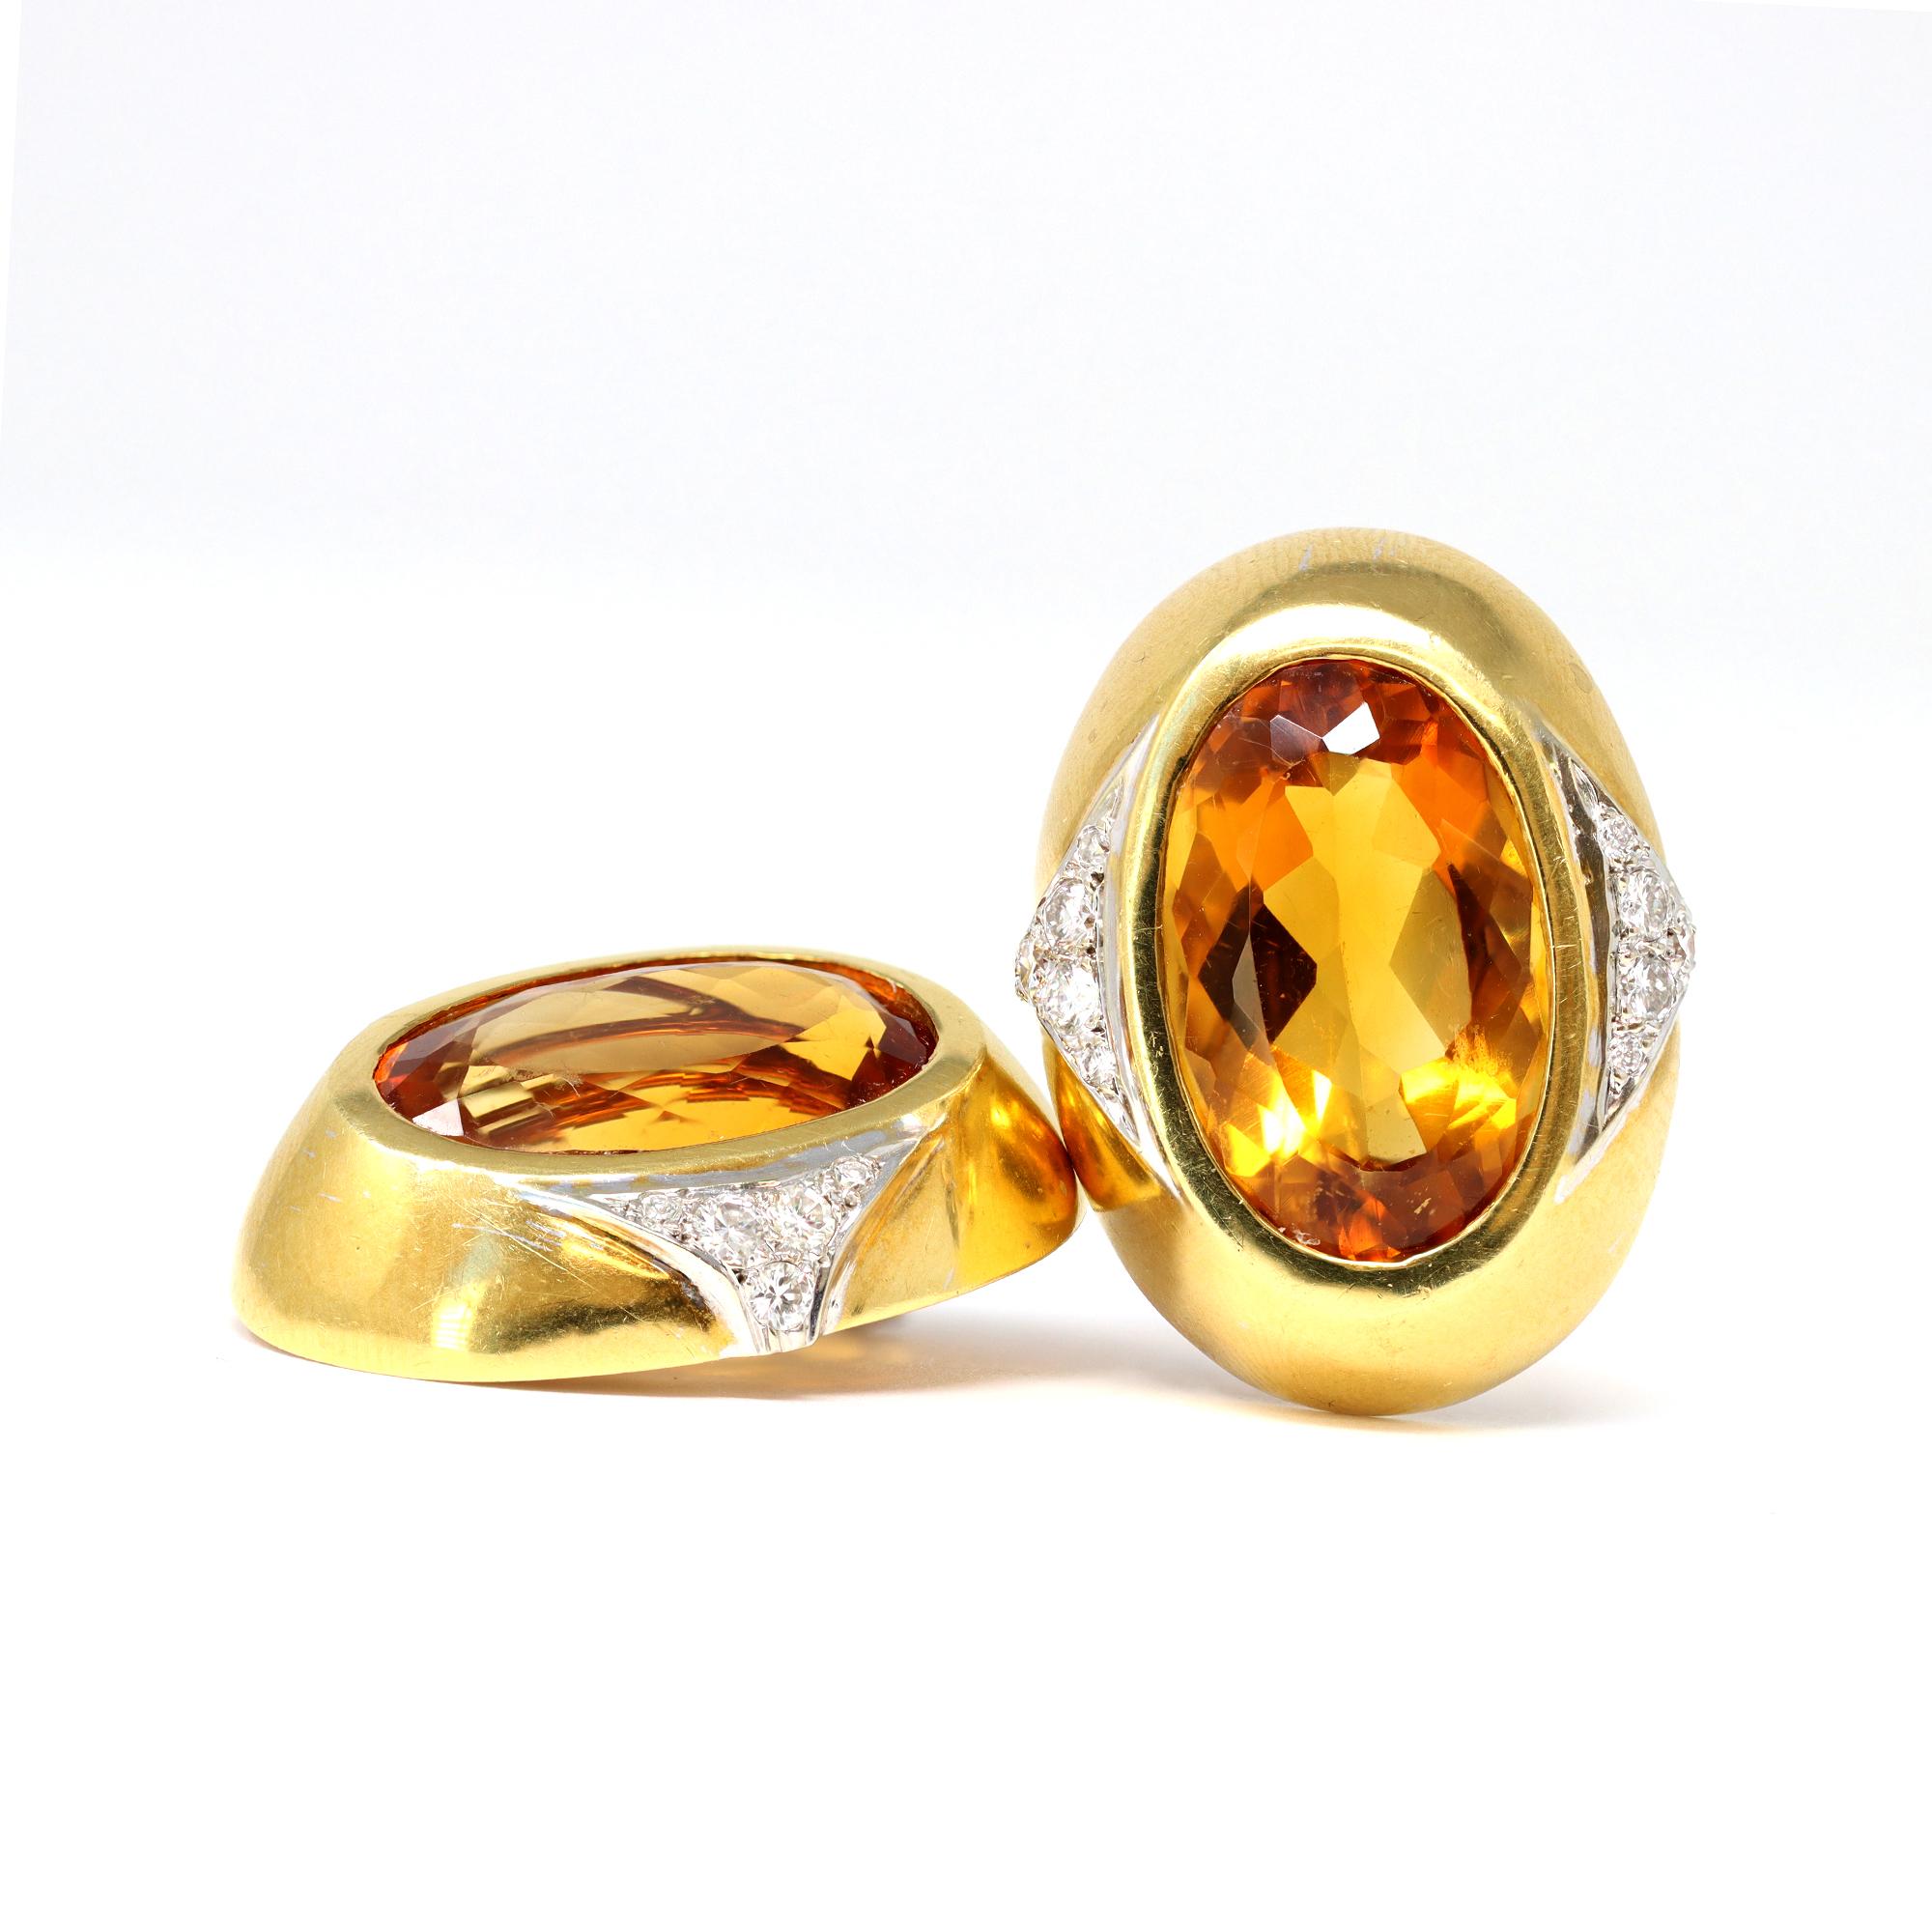 A sunny pair of clip on earrings featuring an oval shape faceted citrine adorned with diamonds. The earrings circa 1980 are set in 18 karat yellow gold with an estimated weight of 1.20 carats of diamonds, GH color and VS clarity. The citrines weight